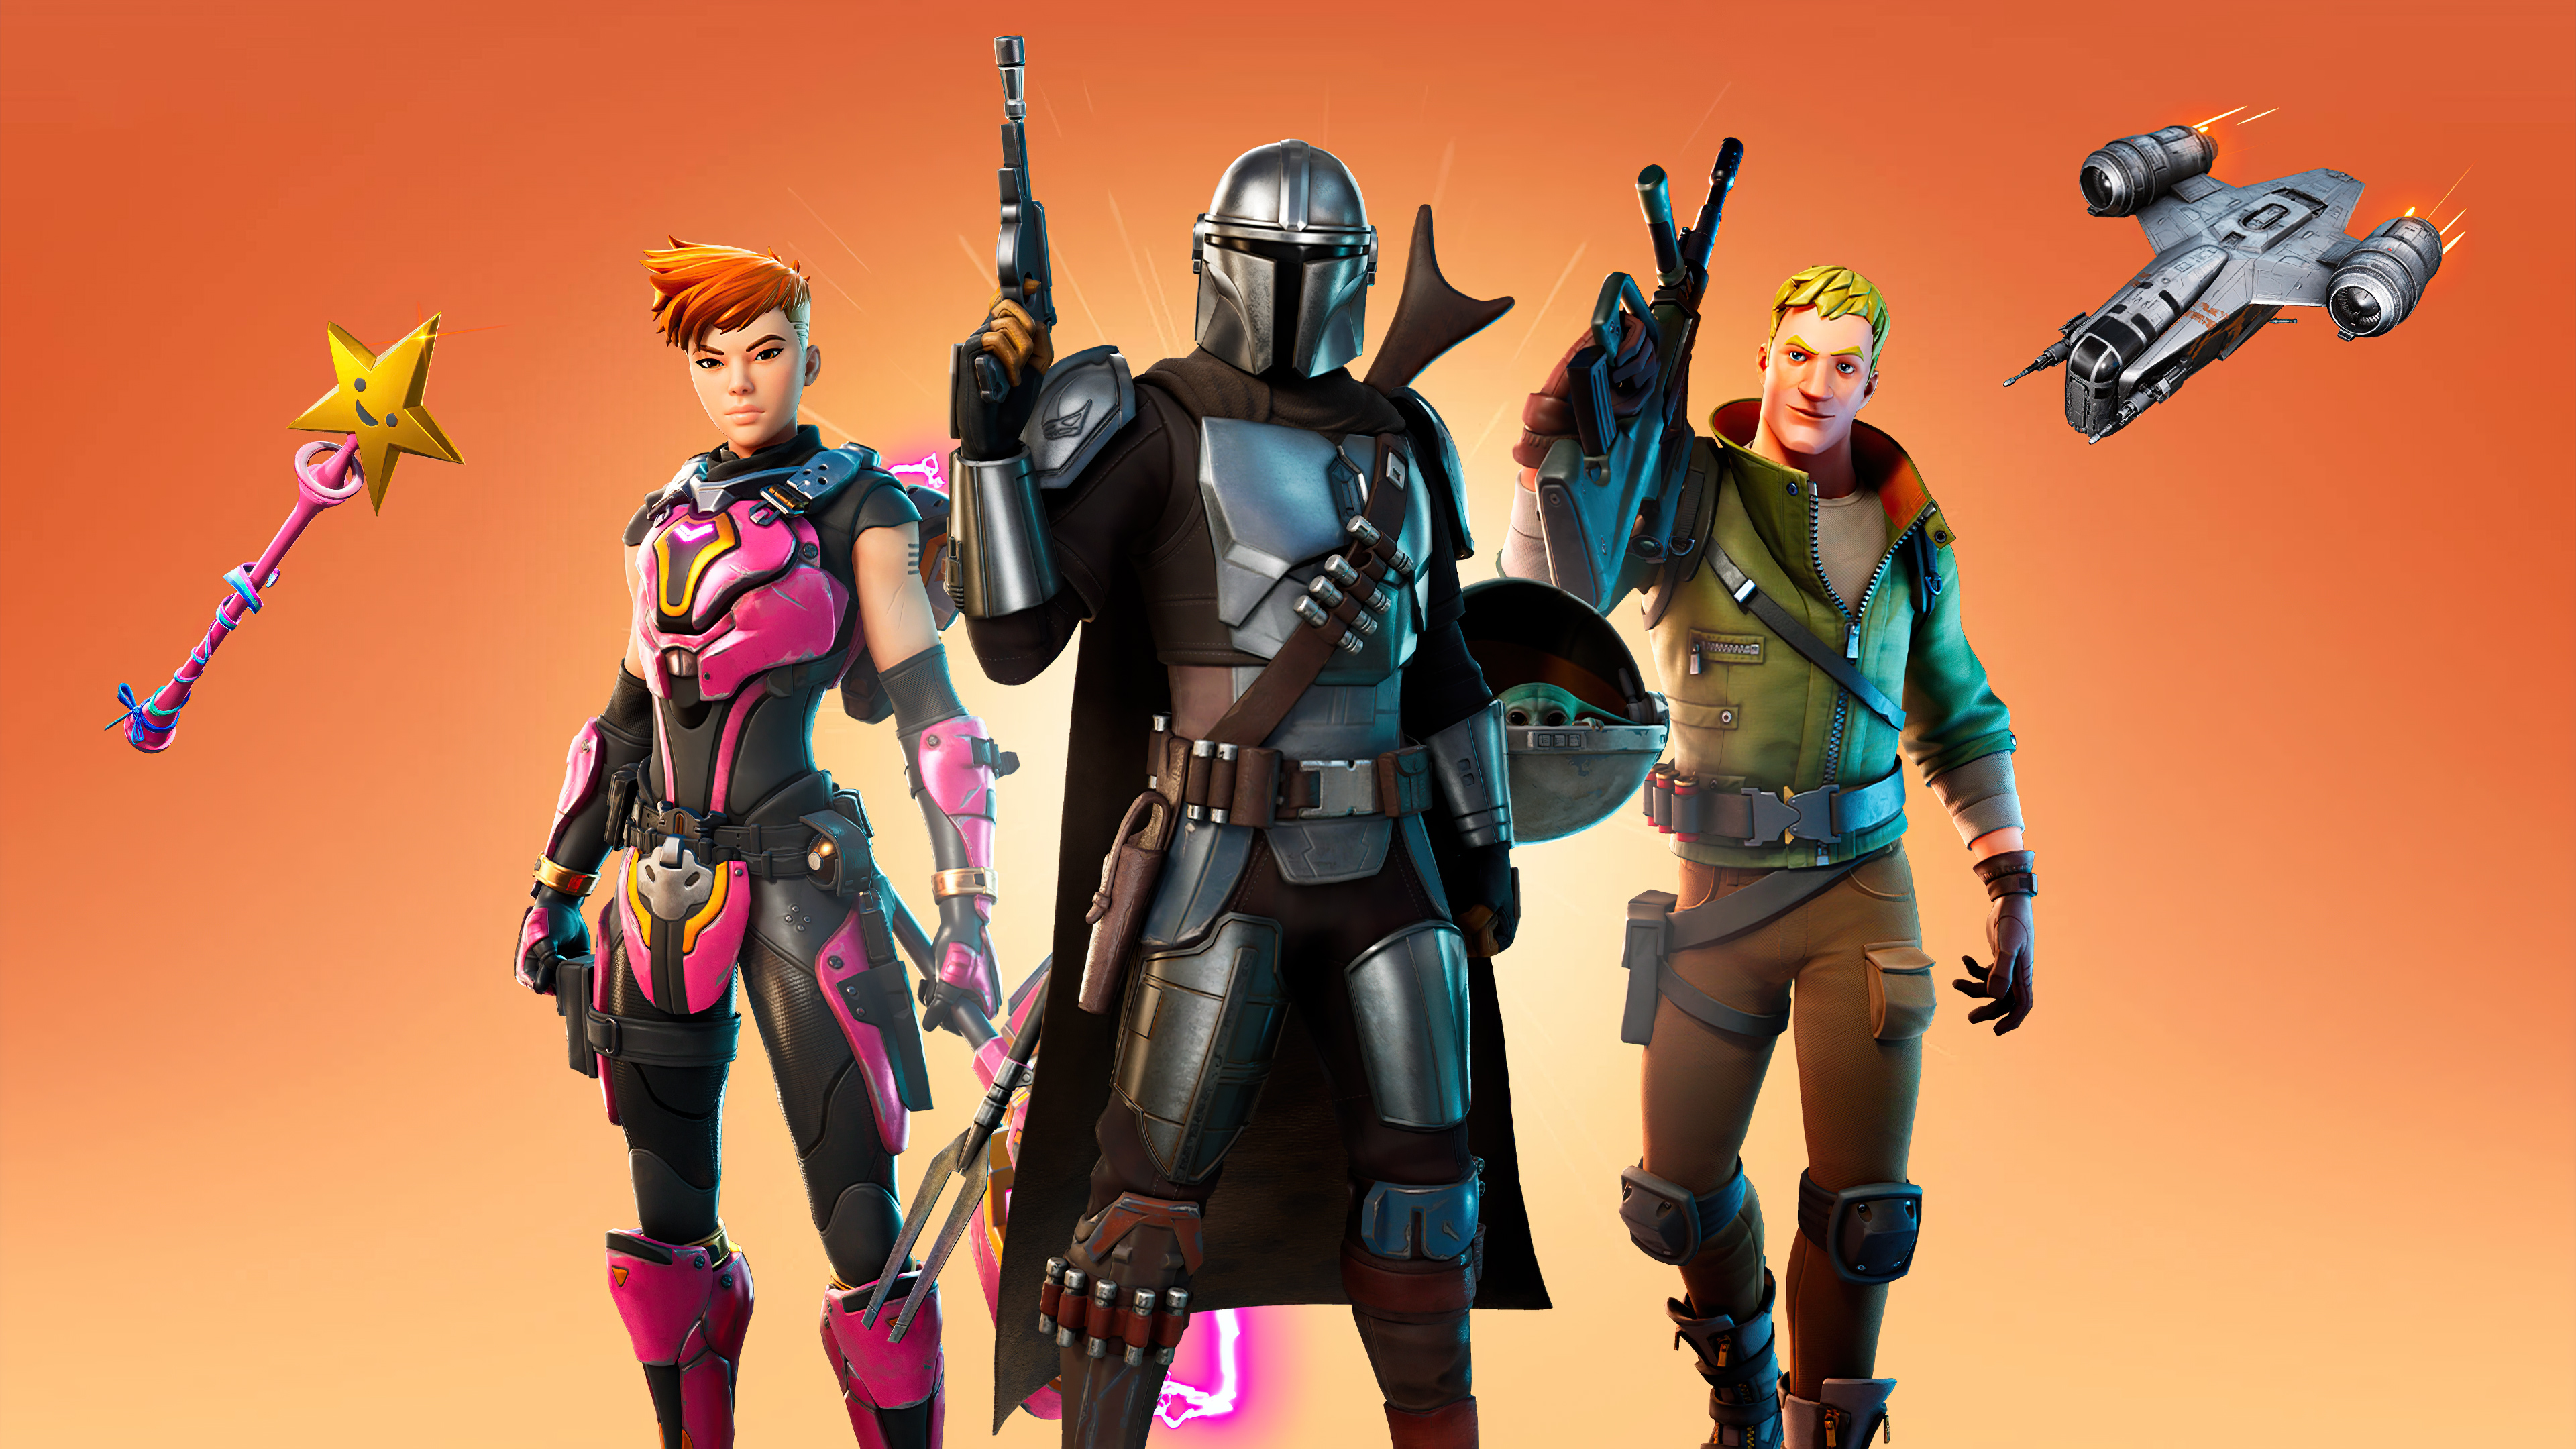 16+ Fortnite Wallpapers: HD, 4K, 5K for PC and Mobile | Download free images  for iPhone, Android